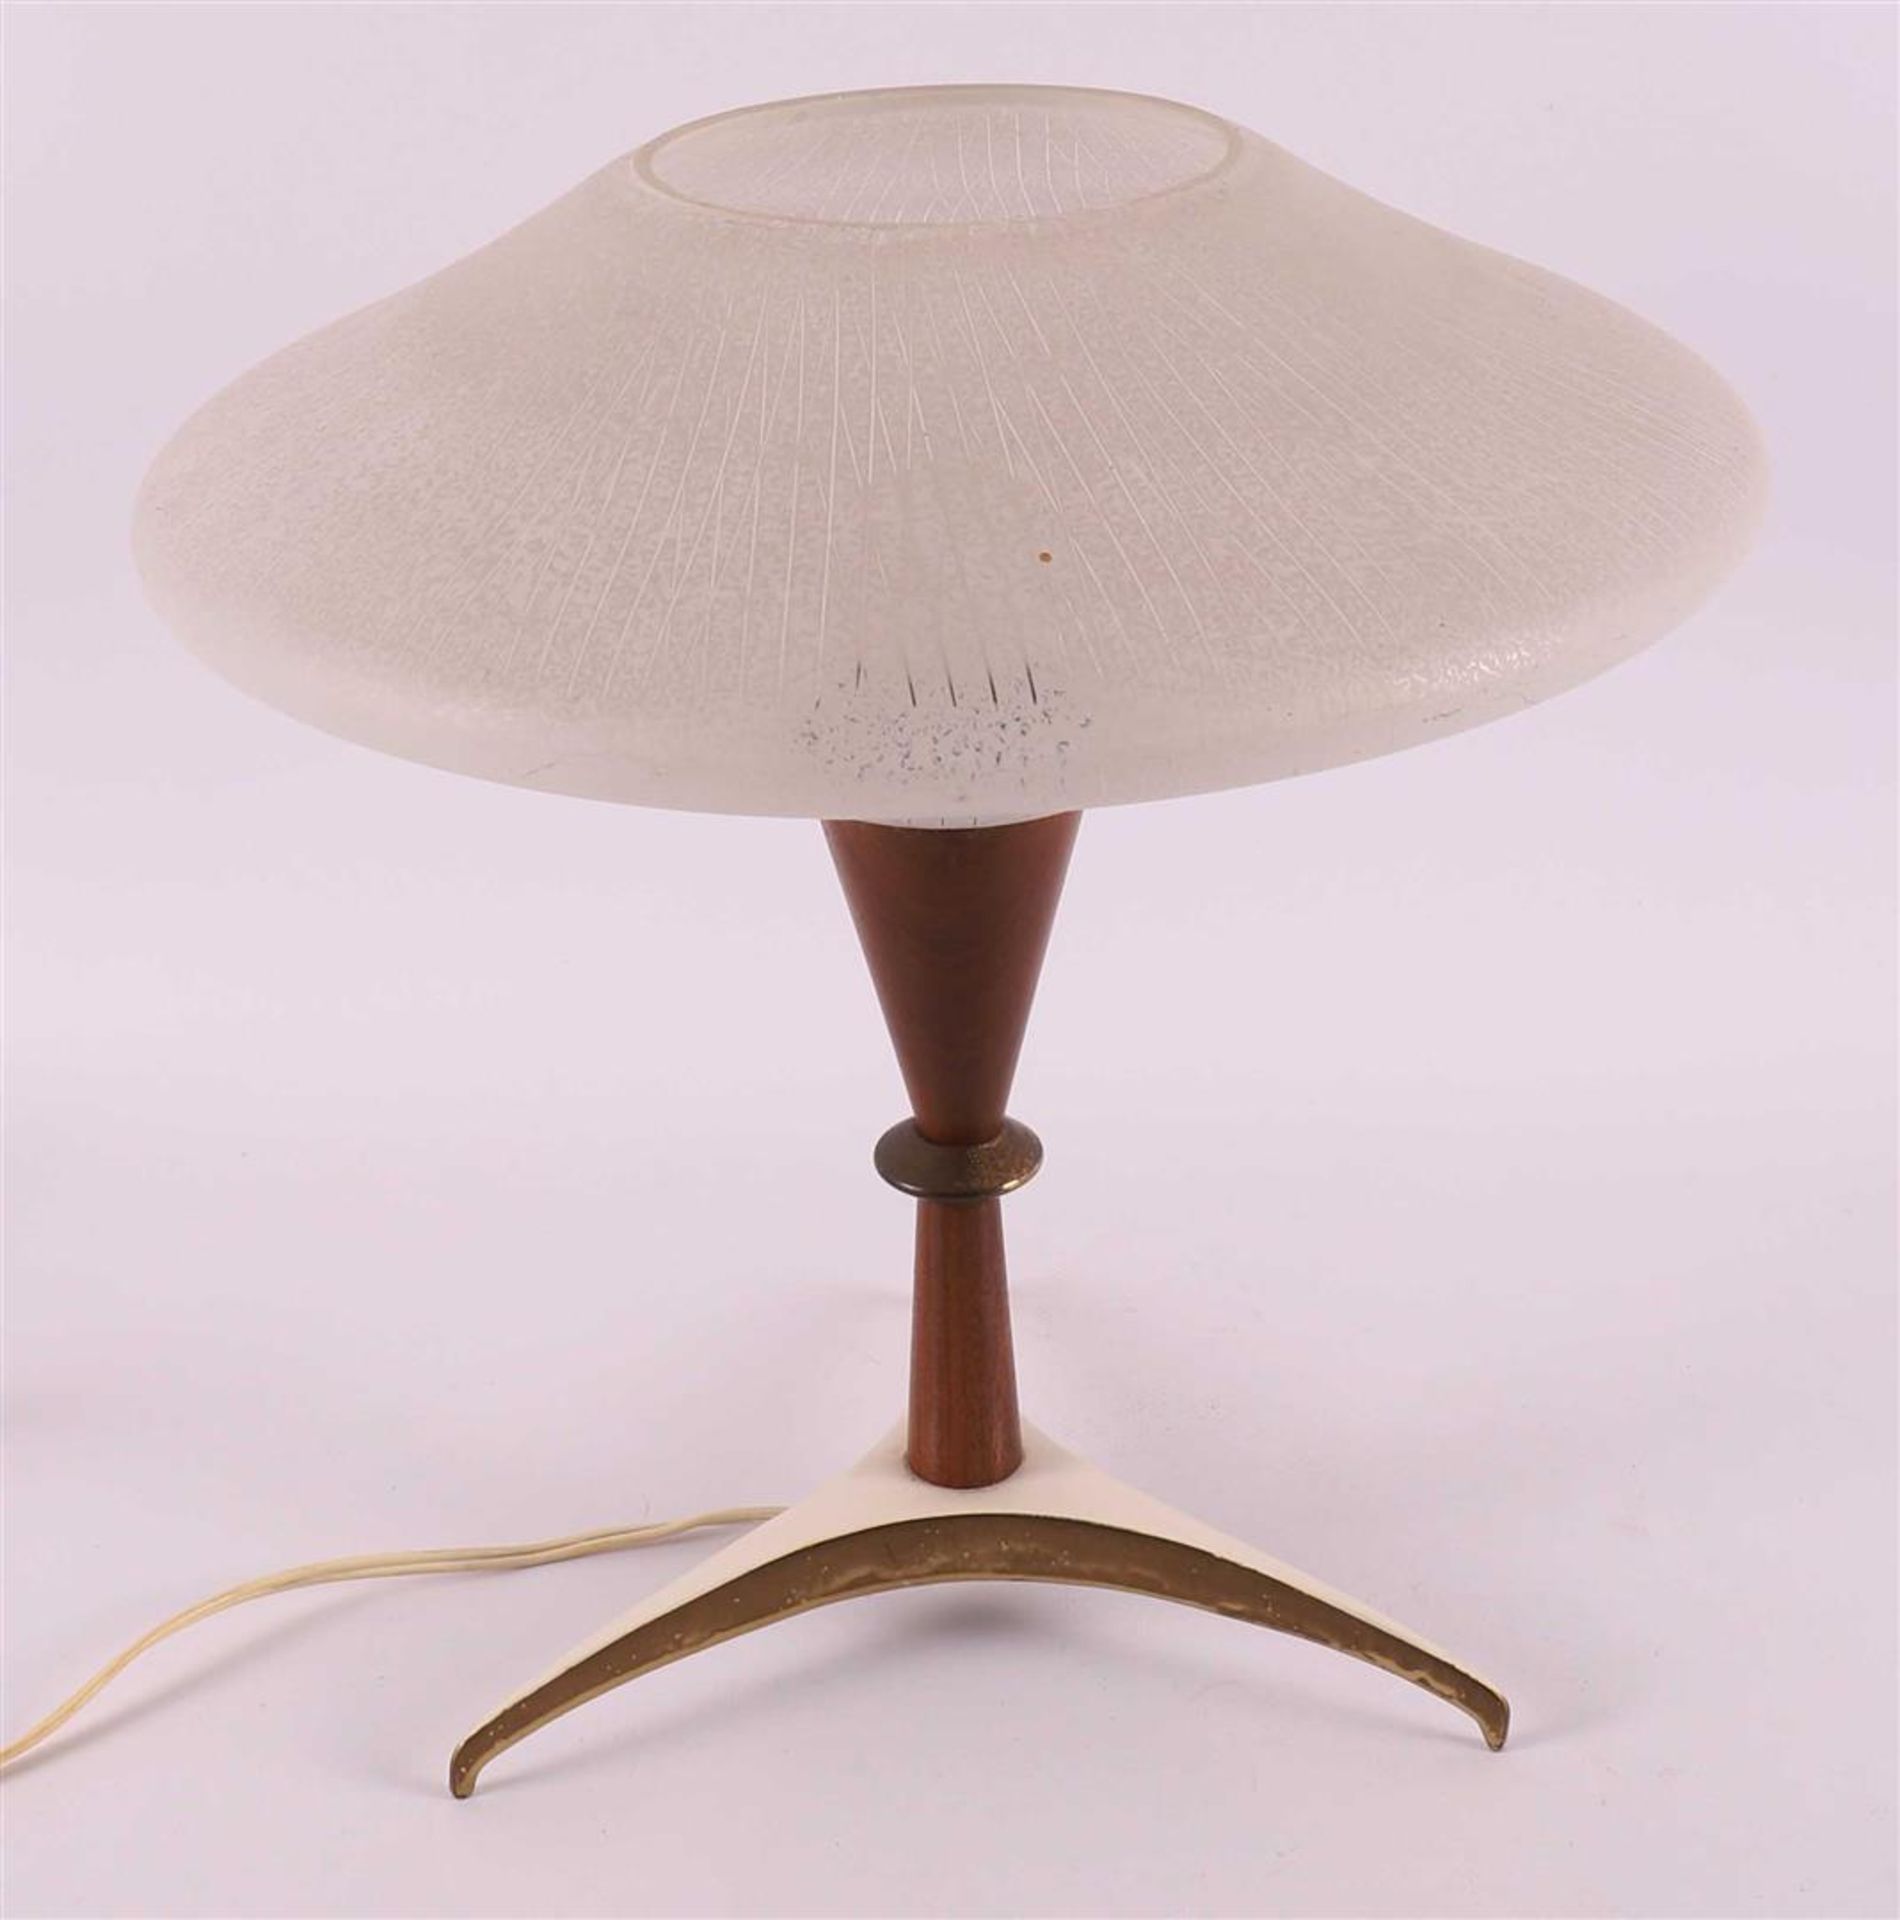 A vintage design table lamp with satin glass shade, 1950s.